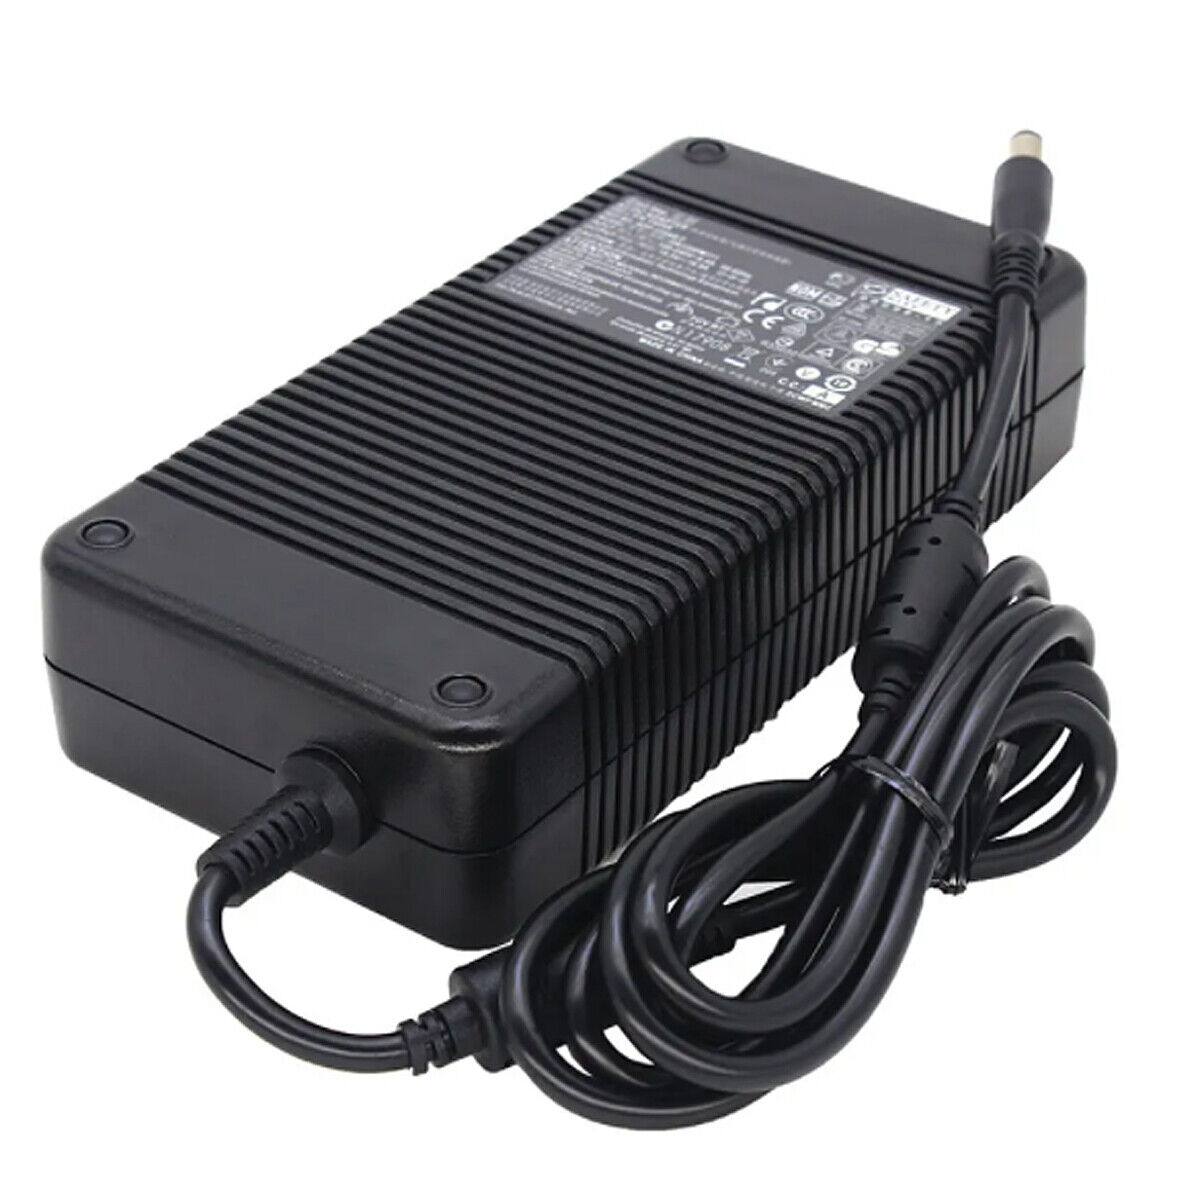 For Dell Alienware M18x X51 AM18X-6732BAA 330w 16.9a Laptop Power Charger Cord